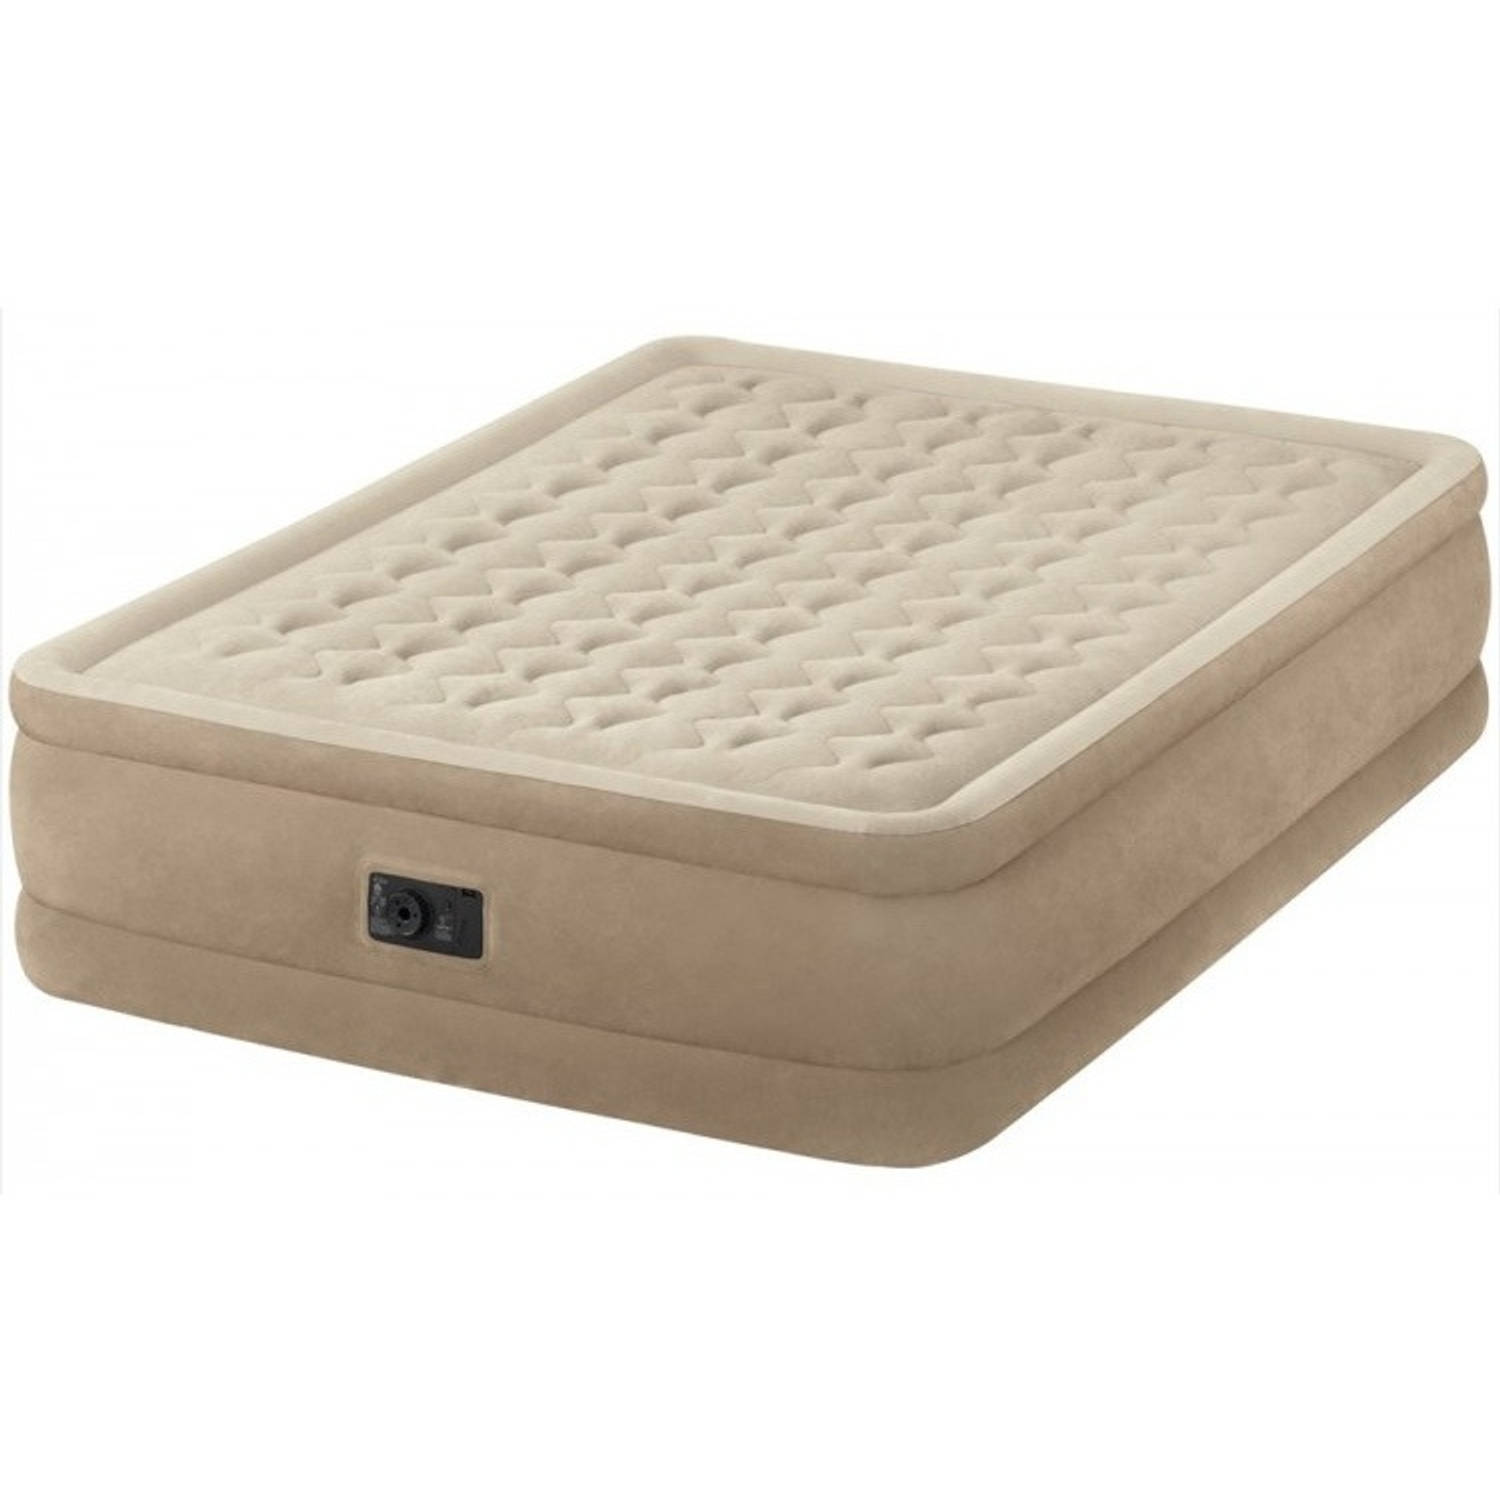 Intex luchtbed 2-persoons Ultra Plush beige 203 x 152 x 46 | Blokker